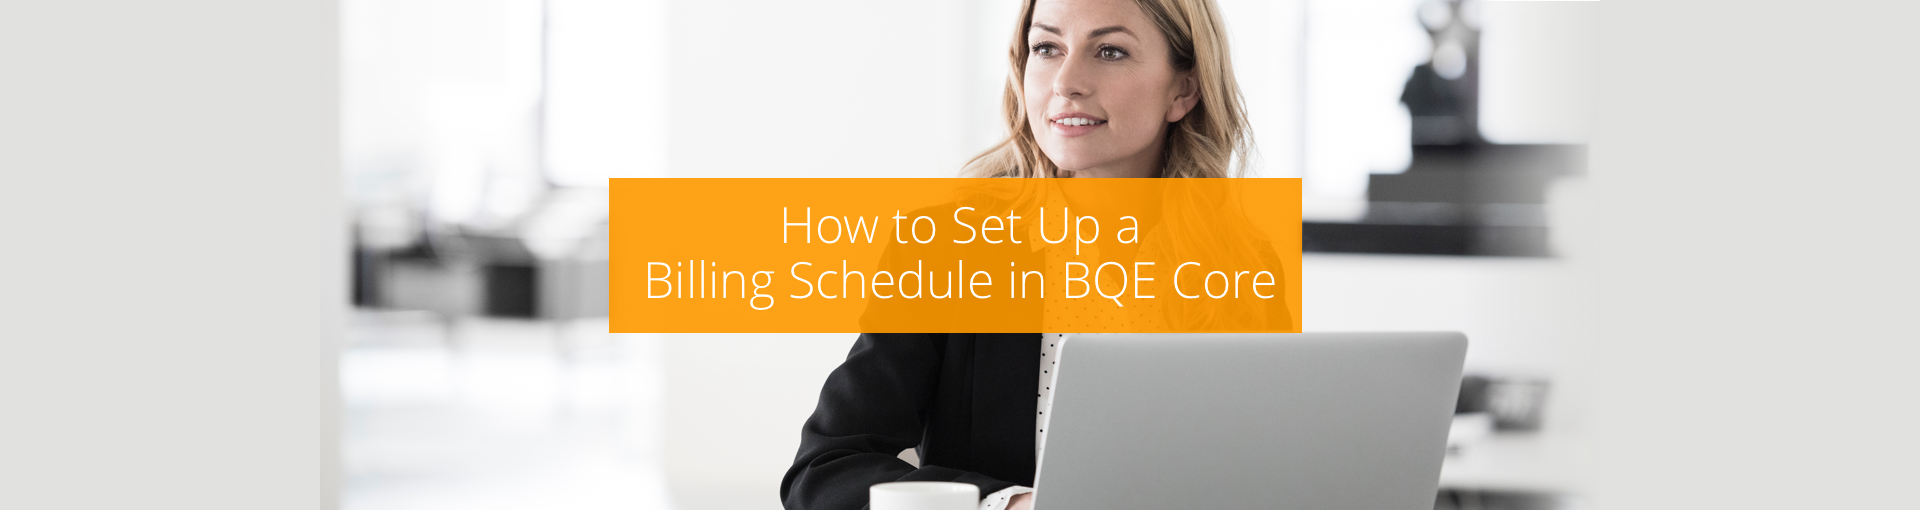 How to Set Up a Billing Schedule in BQE CORE Featured Image